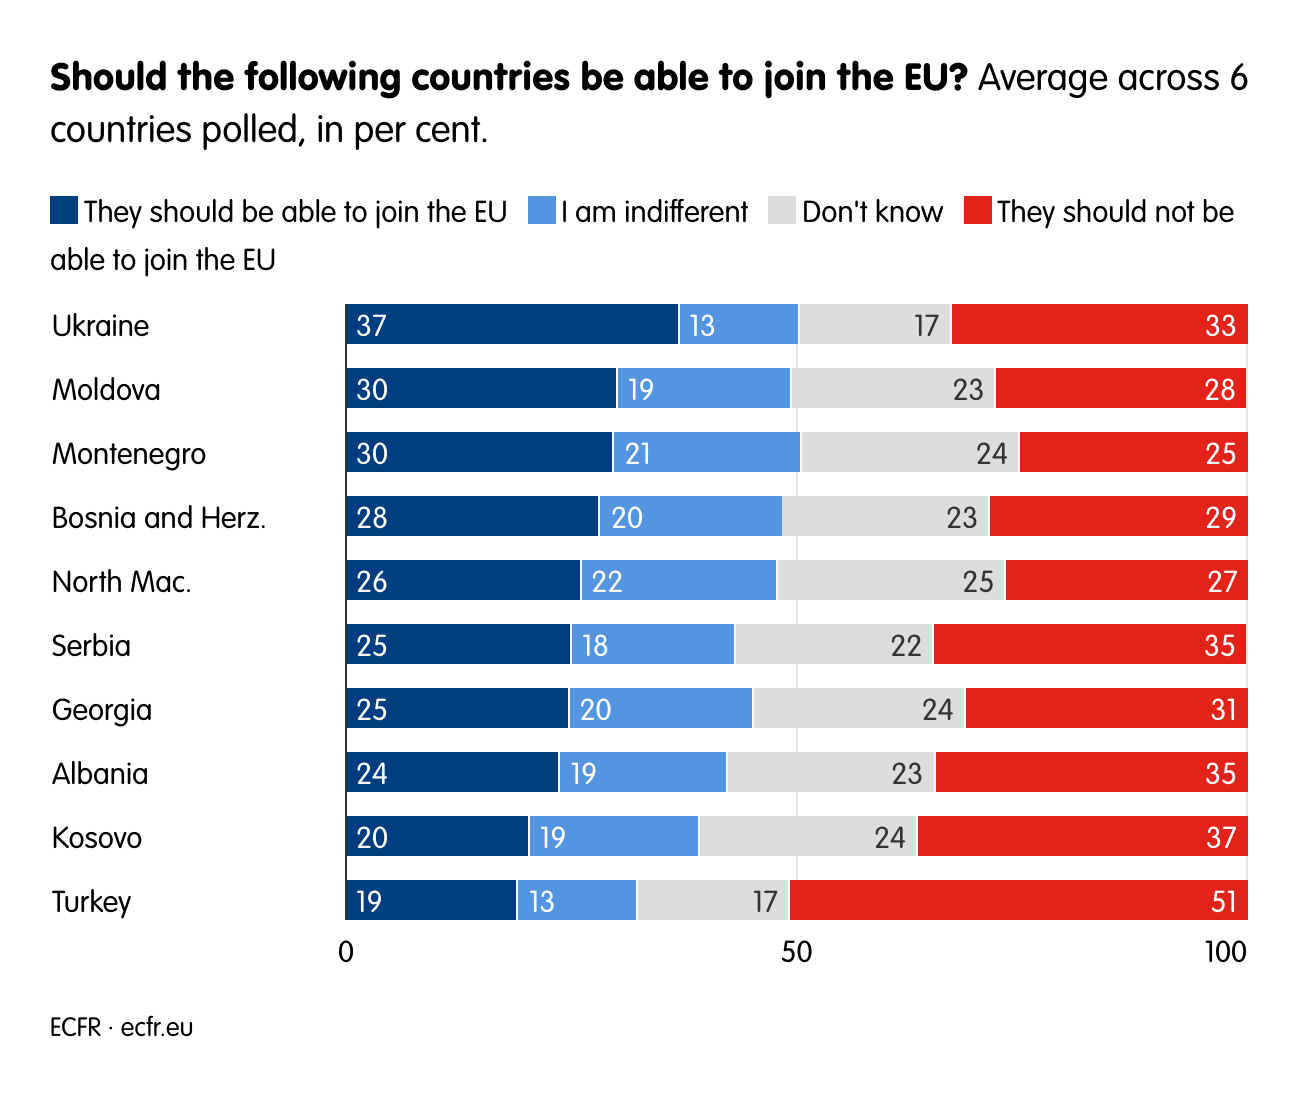 Should the following countries be able to join the EU?